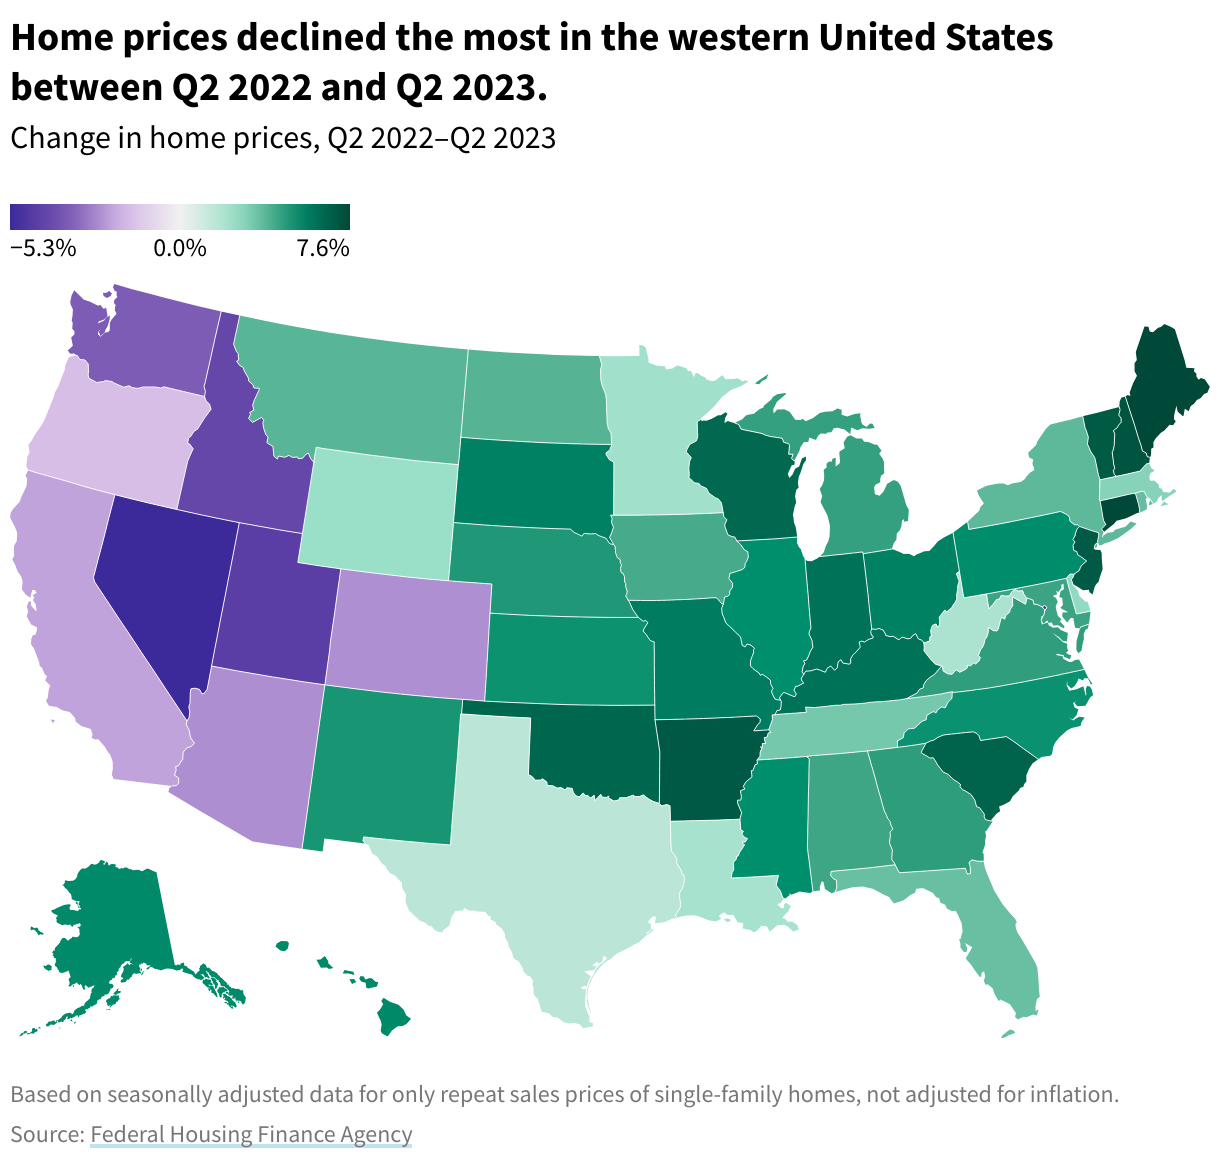 Map of US states showing that states on the west tended to have decreases in home prices, unlike the rest of the country.